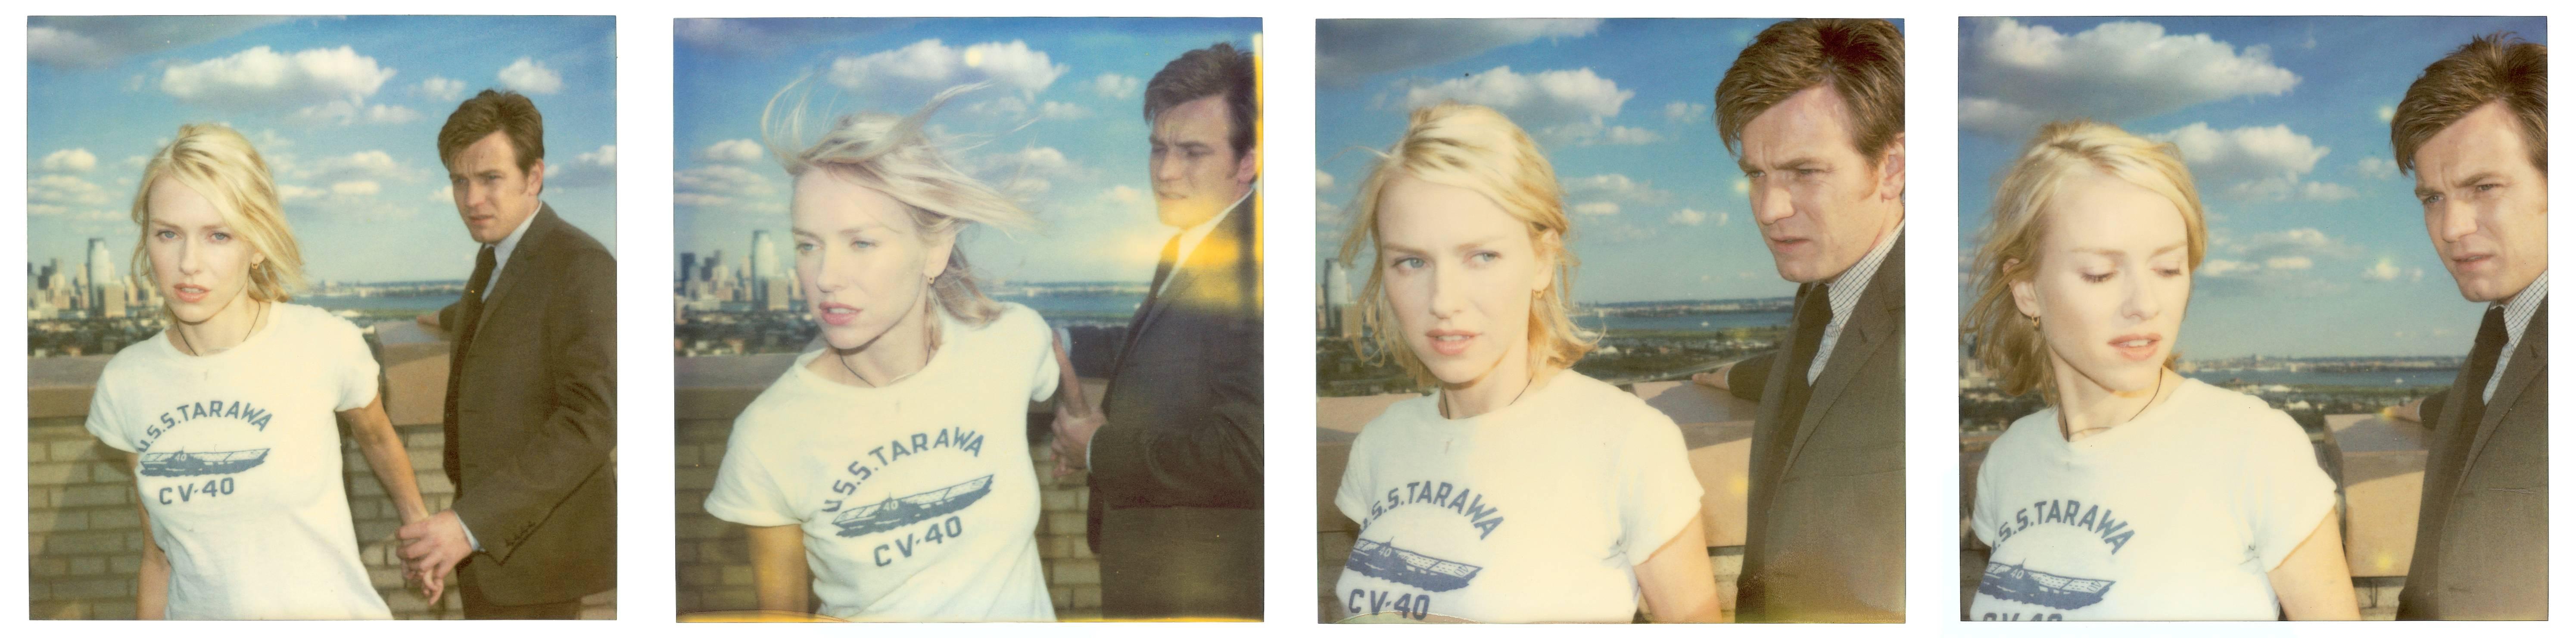 Stefanie Schneider Color Photograph - Lila and Sam from the movie Stay with Ewan McGregor, Naomi Watts